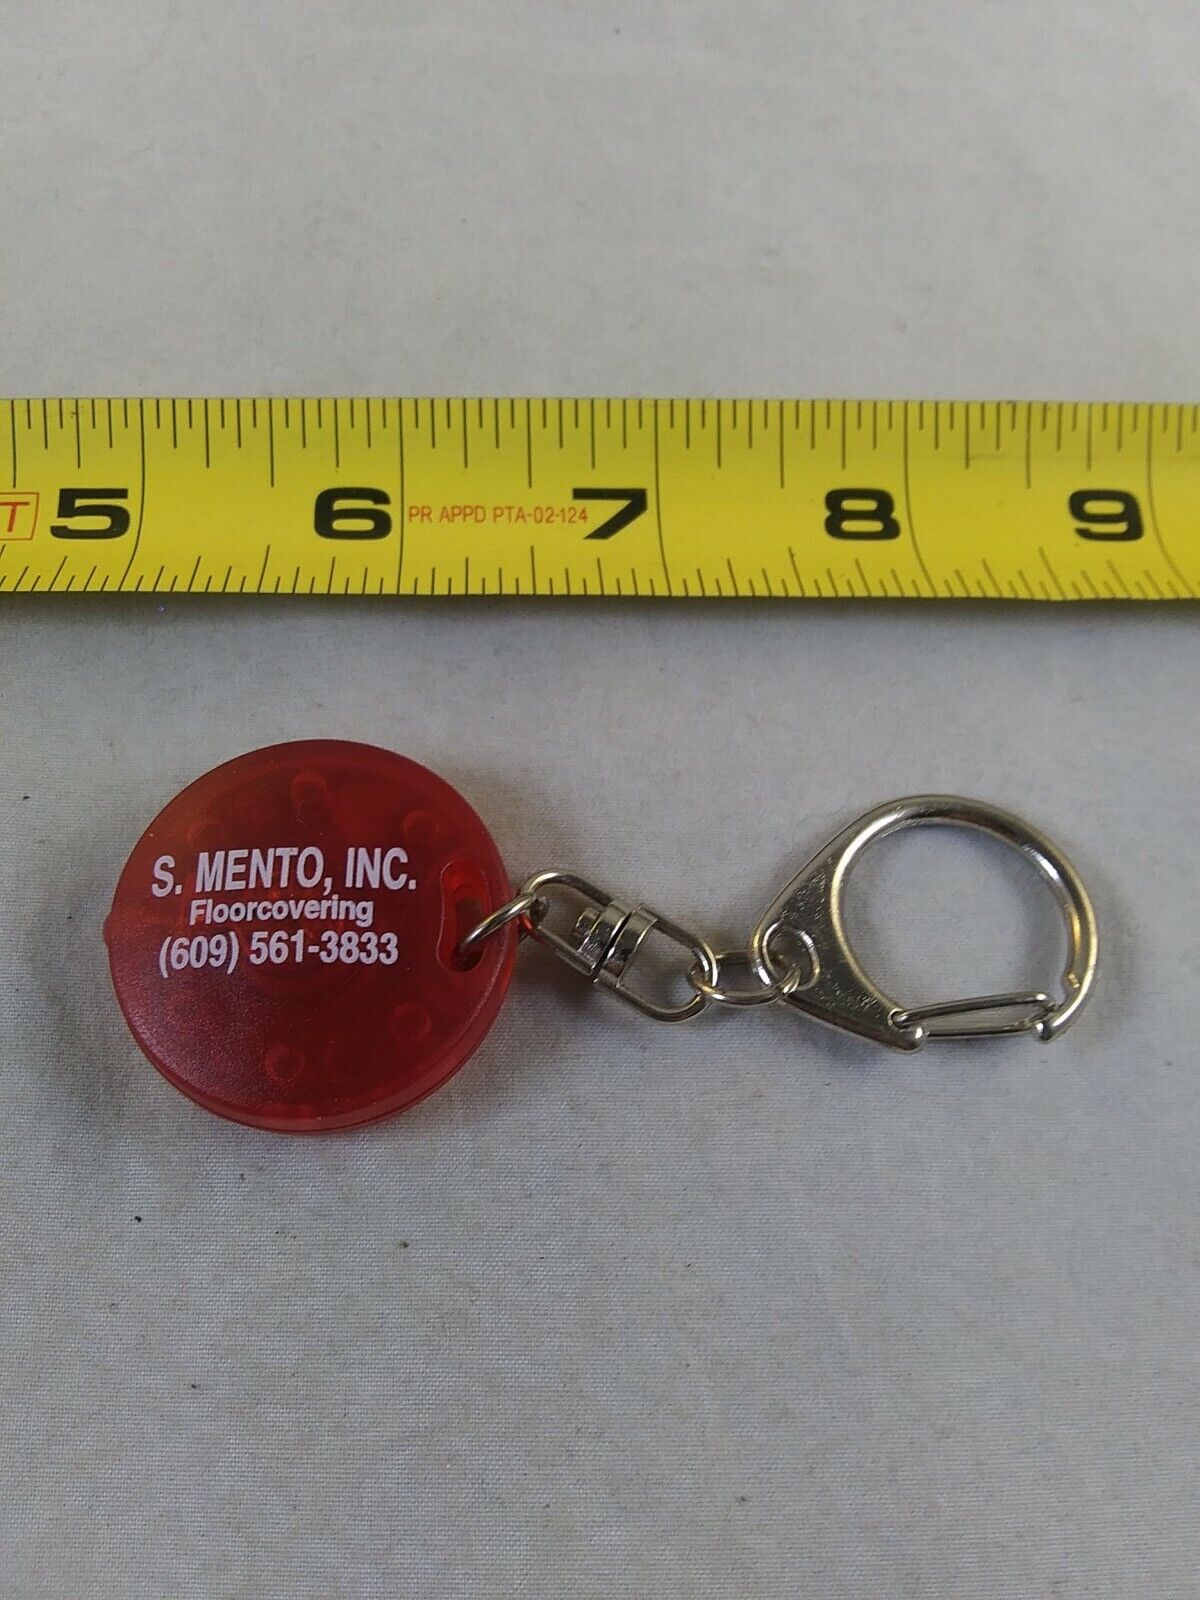 Vintage S. Mento Floorcovering NOT WORKING LIGHT Keychain Key Ring Chain *QQ62